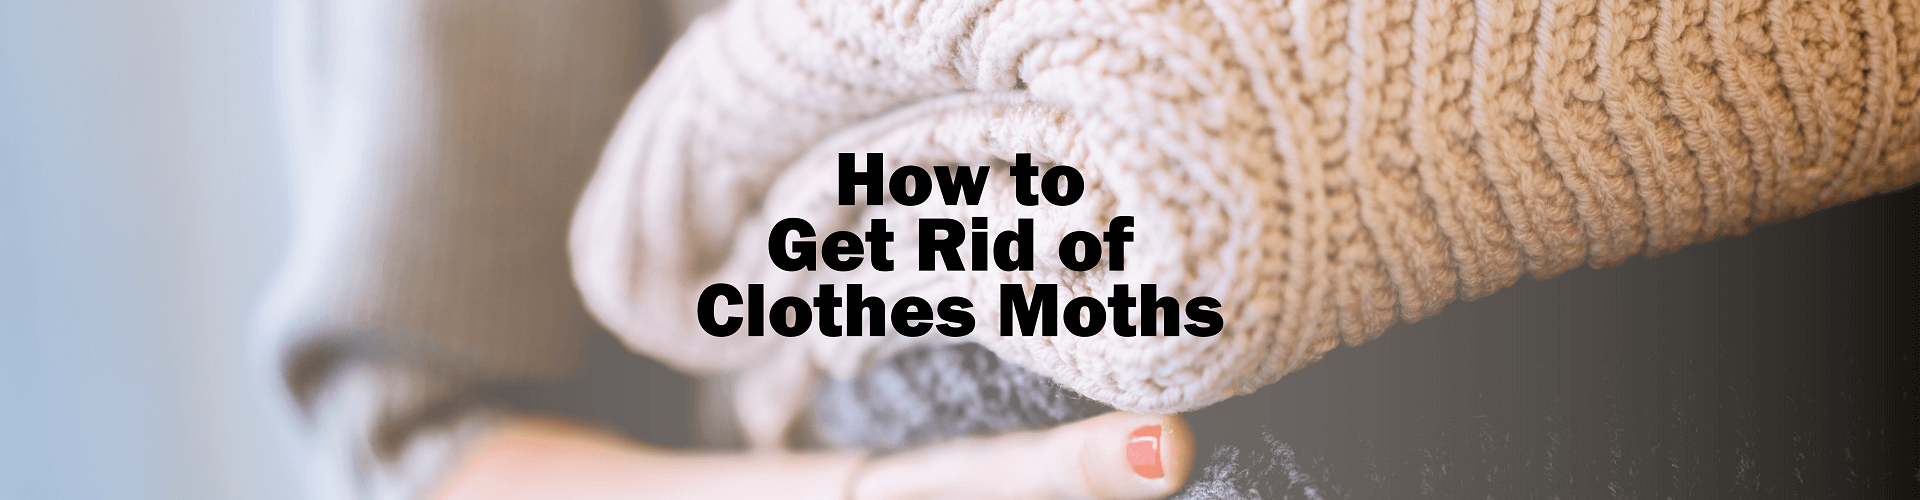 How to Get Rid of Clothes Moths Featured Image